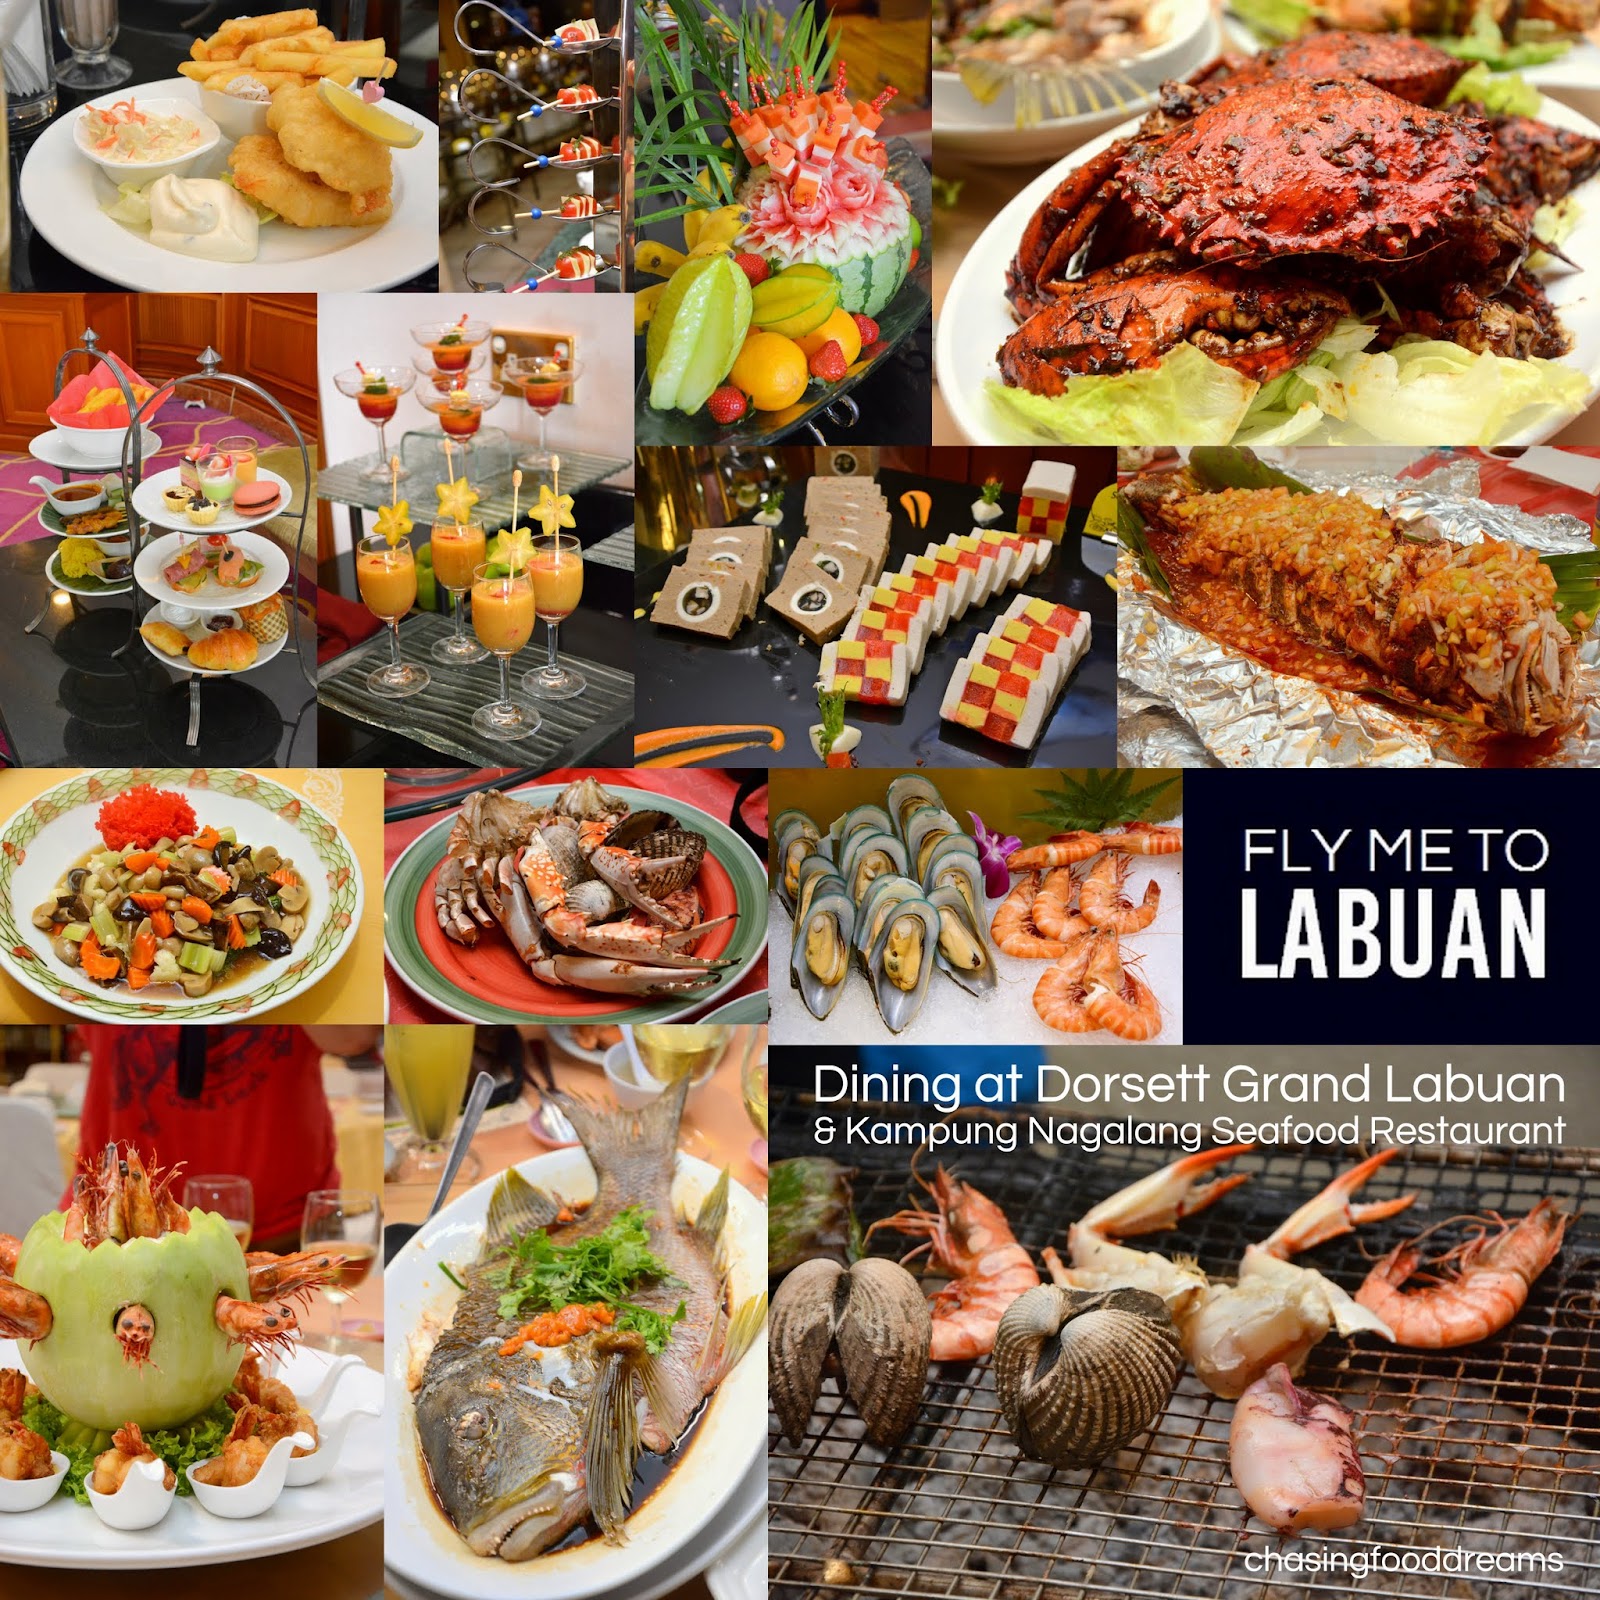 CHASING FOOD DREAMS: Fly Me To Labuan Part 3 – Where to Eat in Labuan